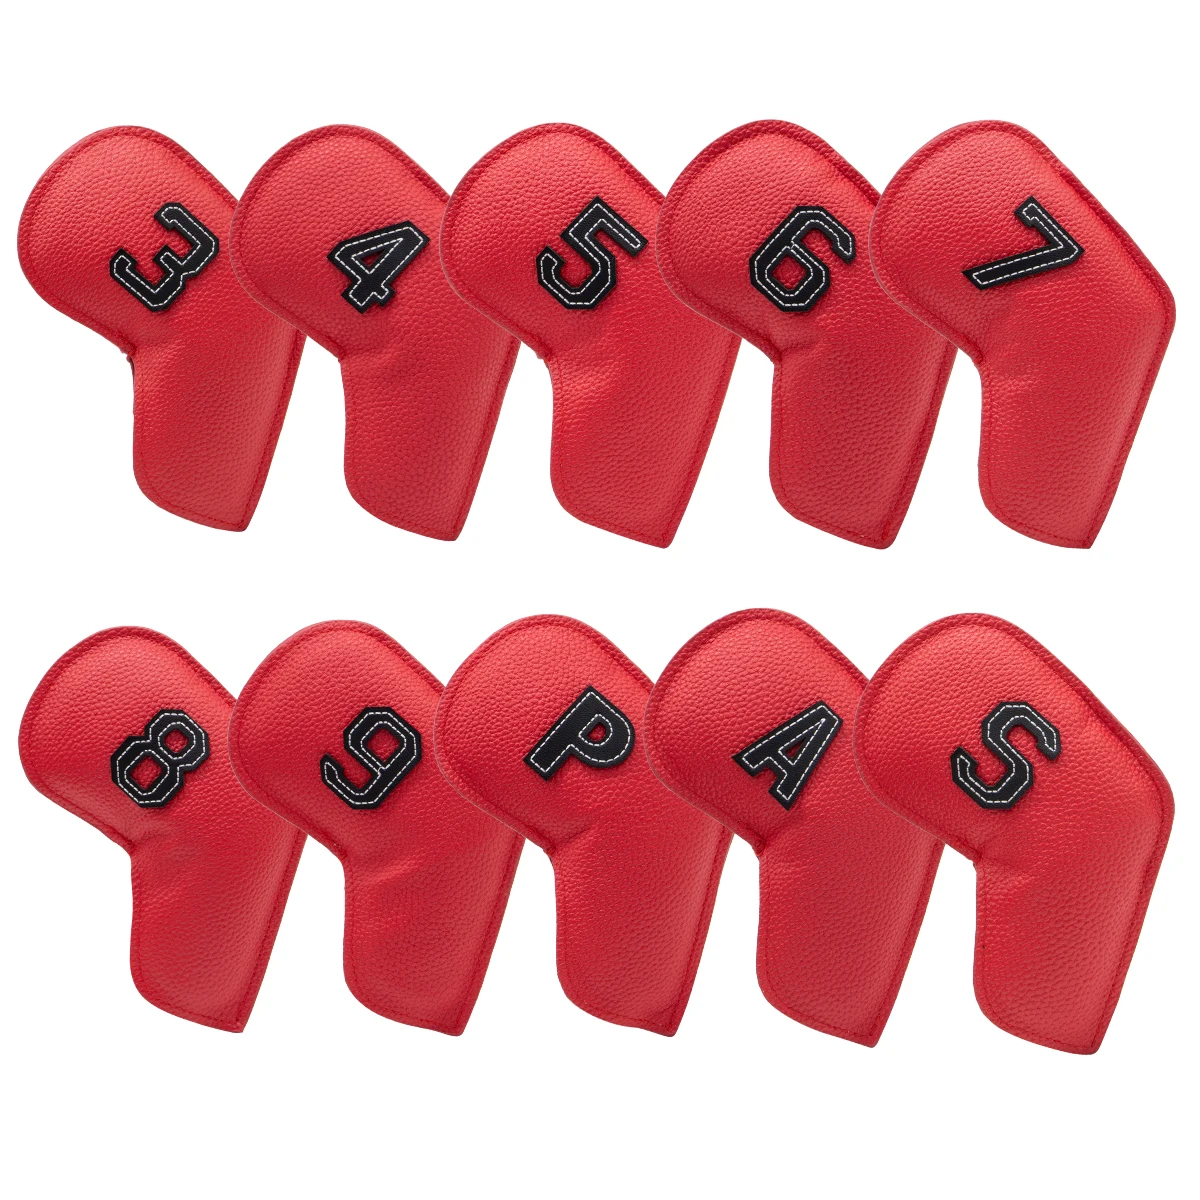 12pcs Thick Synthetic Leather Golf Iron Head Covers Set Head